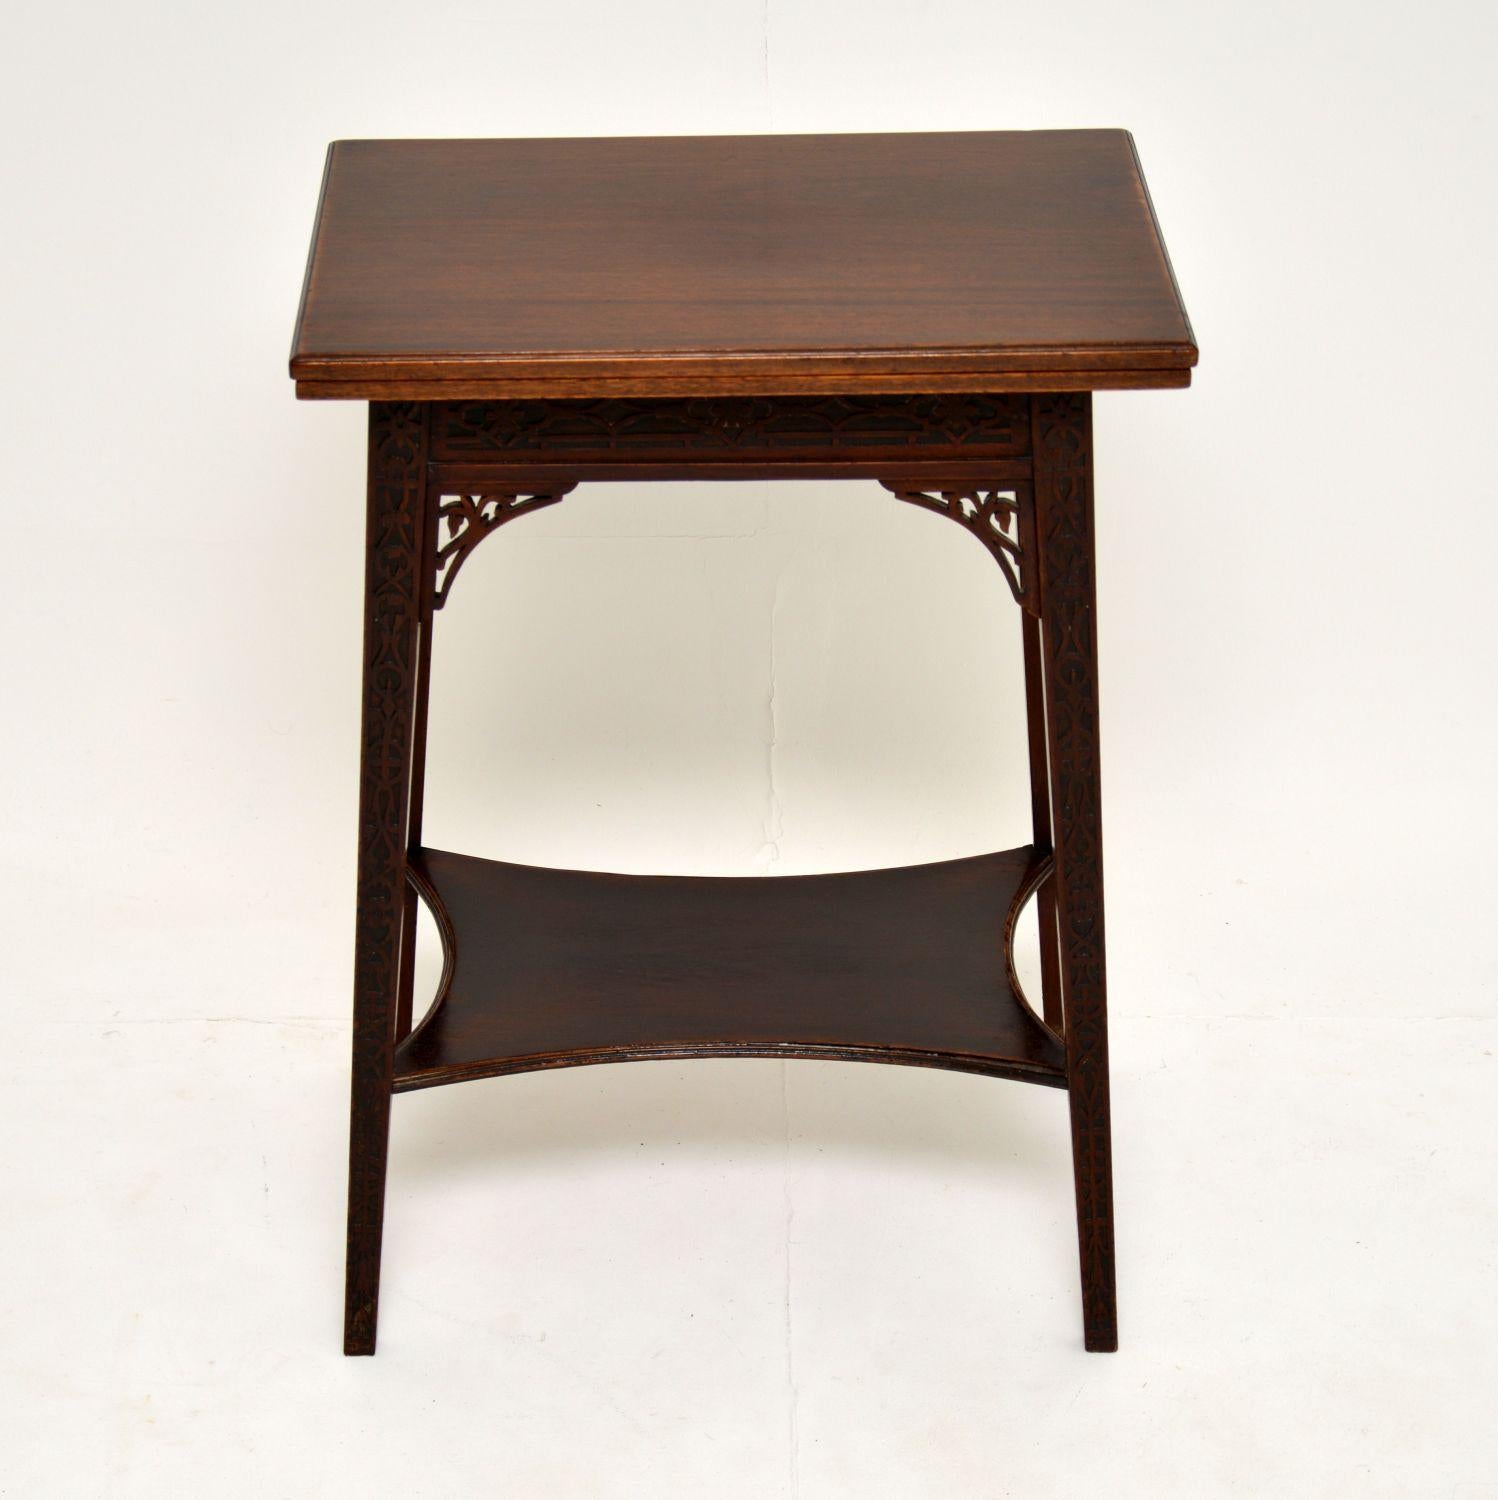 This stunning and unusual antique Edwardian side table, has a flap over top which doubles the top surface and turns it into a tea table or card table. This is beautifully made from mahogany, it dates from the 1890-1900 period.

There is fine